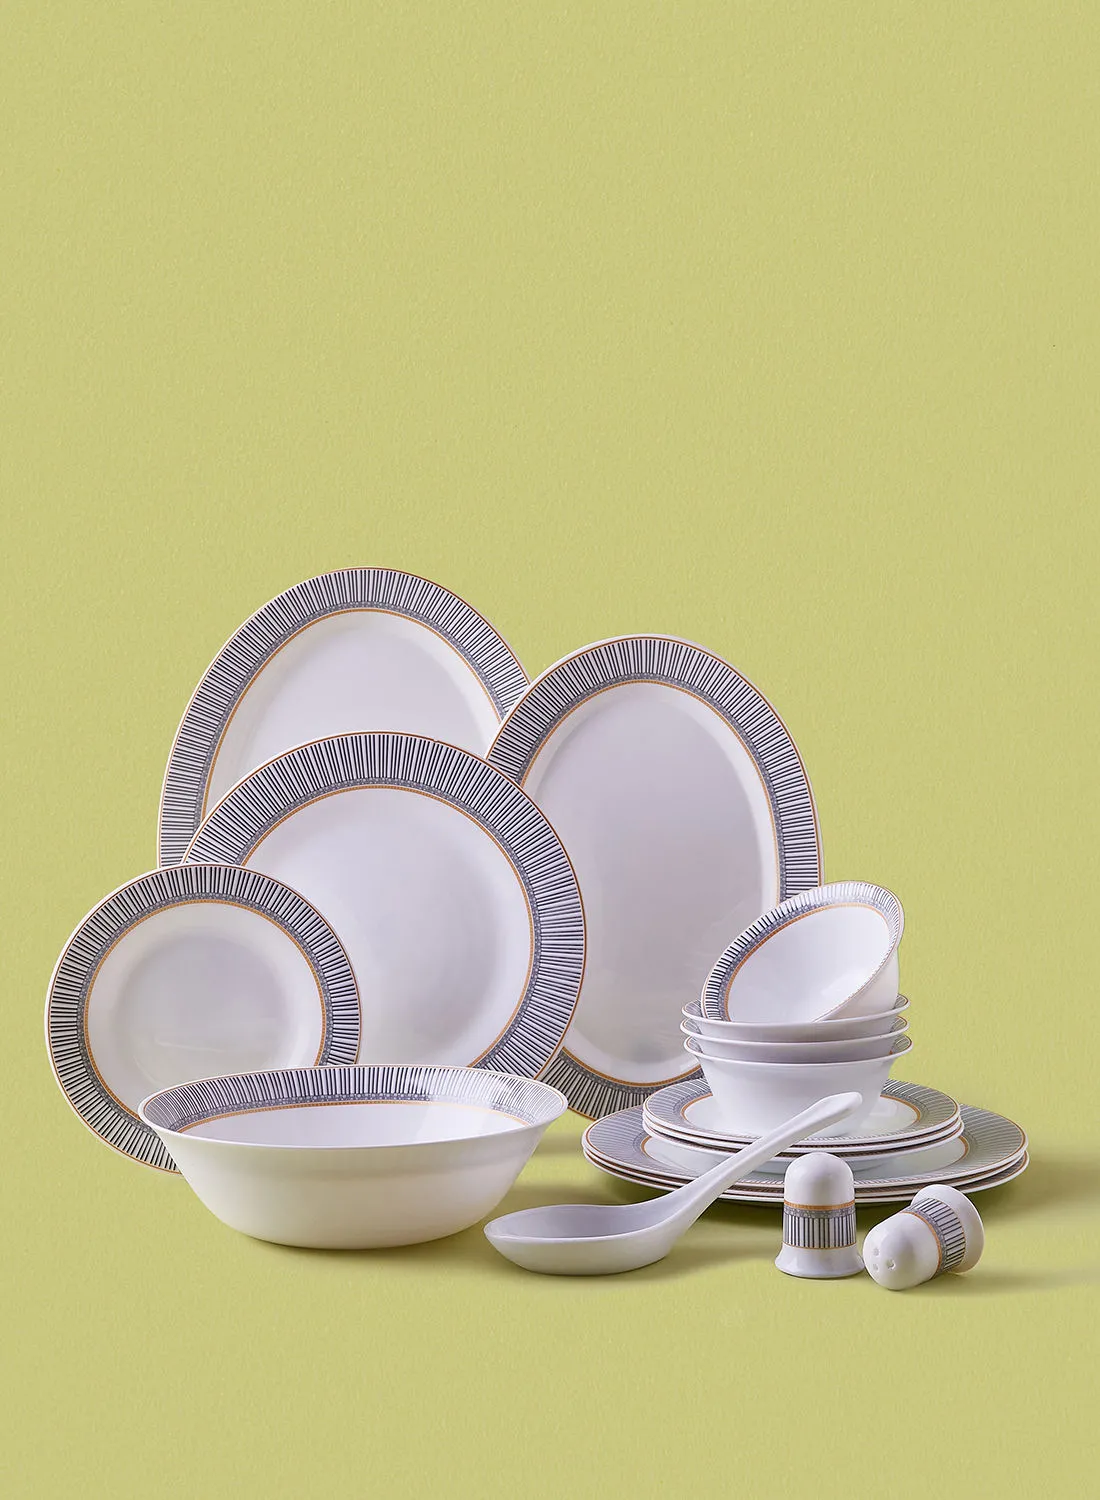 noon east 18 Piece Opalware Dinner Set - Light Weight Dishes, Plates - Dinner Plate, Side Plate, Bowl, Serving Dish And Bowl - Serves 4 - Festive Design Aurora Gold